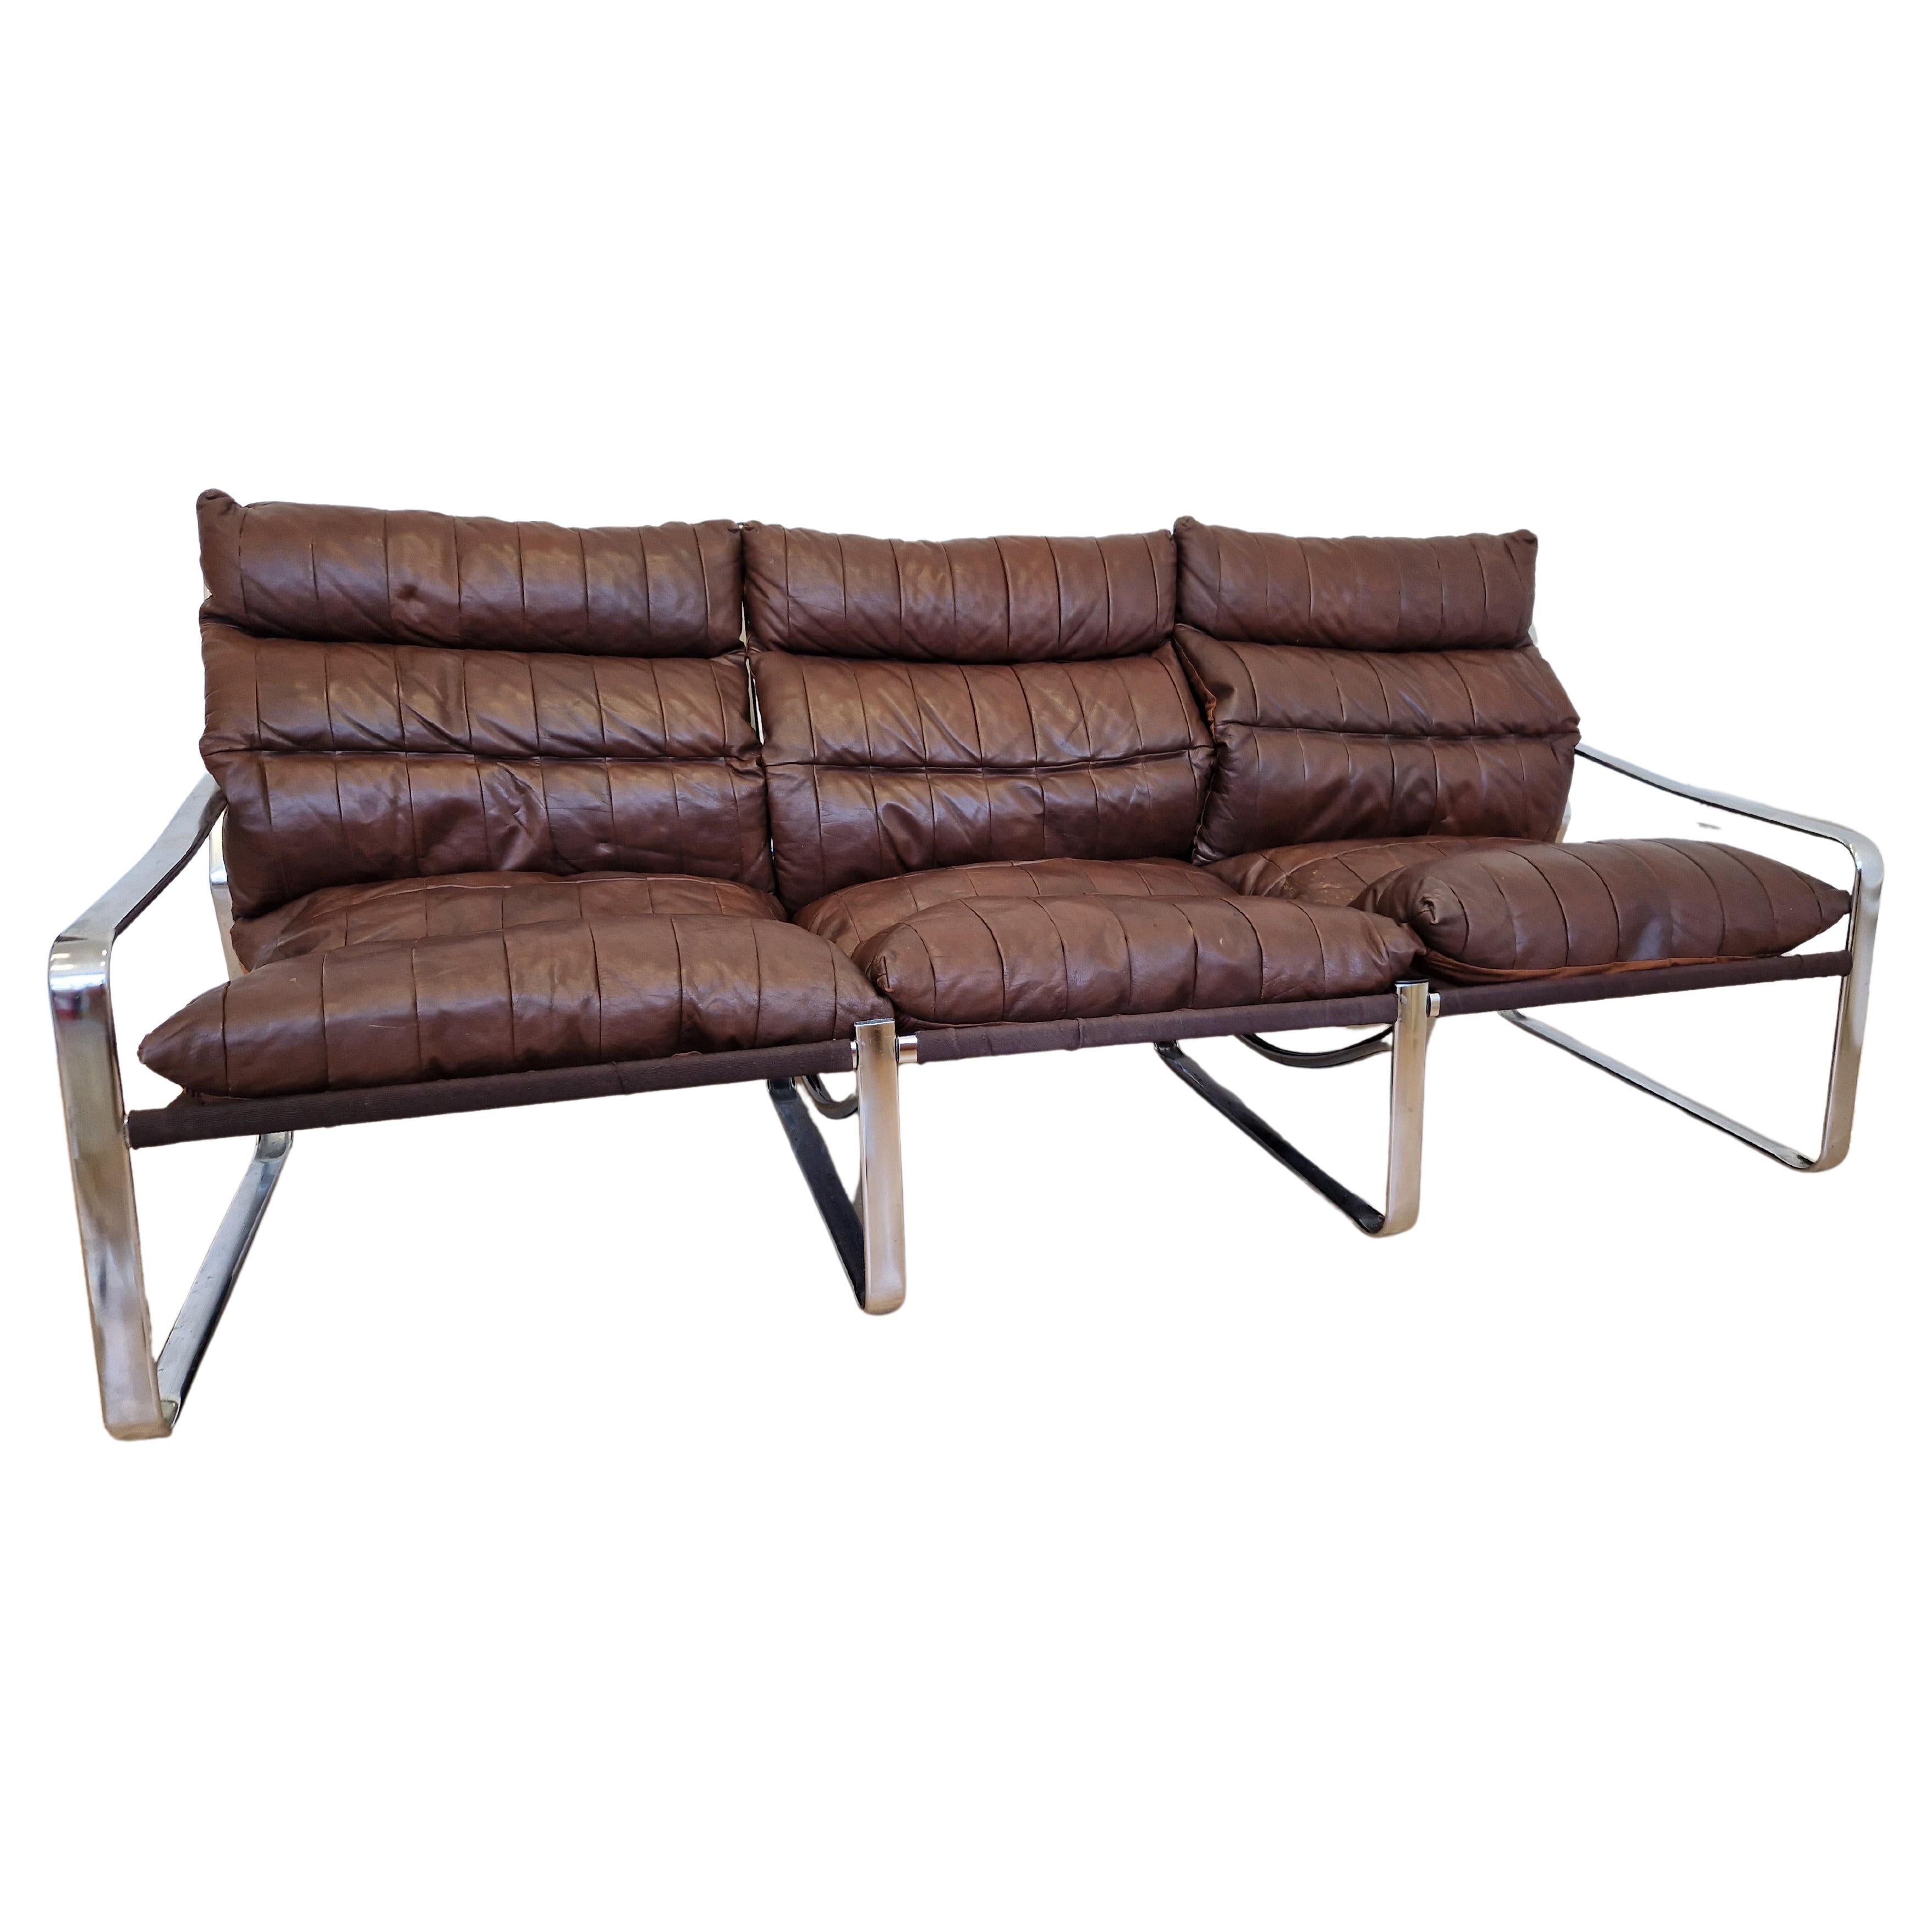 Midcentury Chrome and Patchwork Leather Scandinavian Design Sofa, Sweden, 1970s